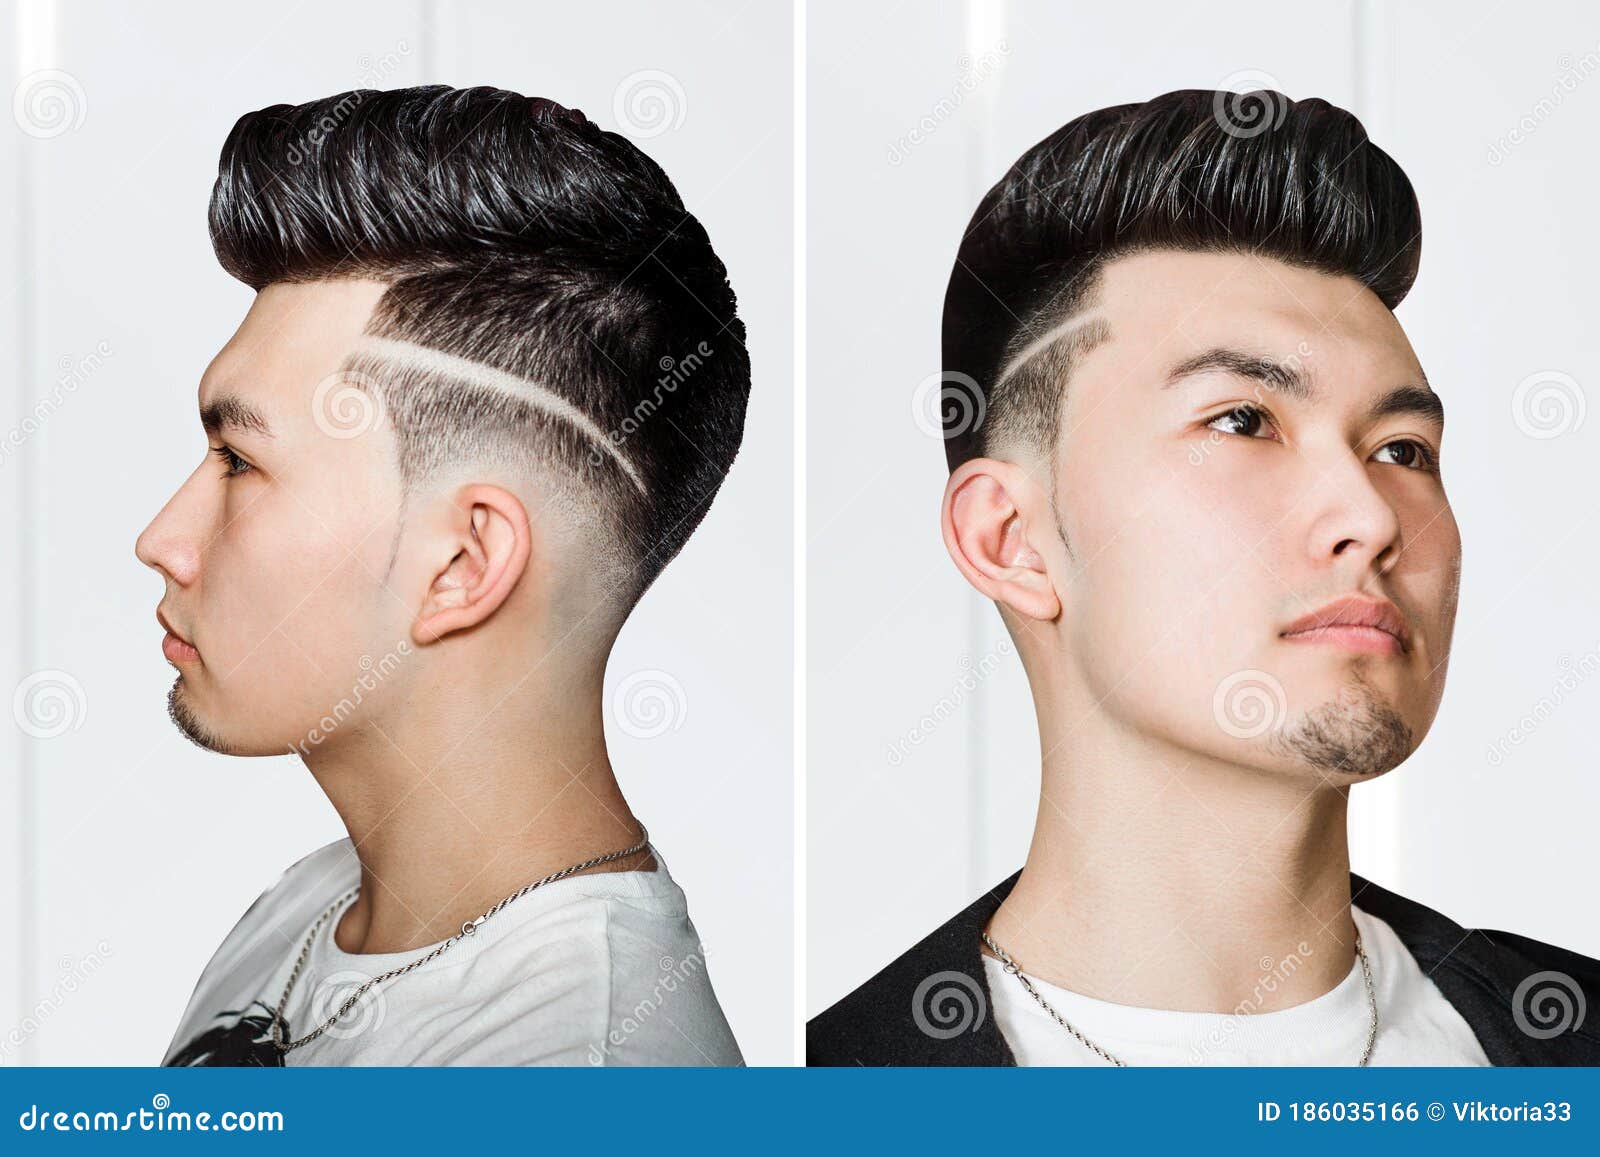 Young Man Brunette with Pompadour Volume Haircut 50s - 60s. Real Photo  Retro Hair Style for Barbershop, Side, Set Stock Photo - Image of elegant,  fashionable: 186035166